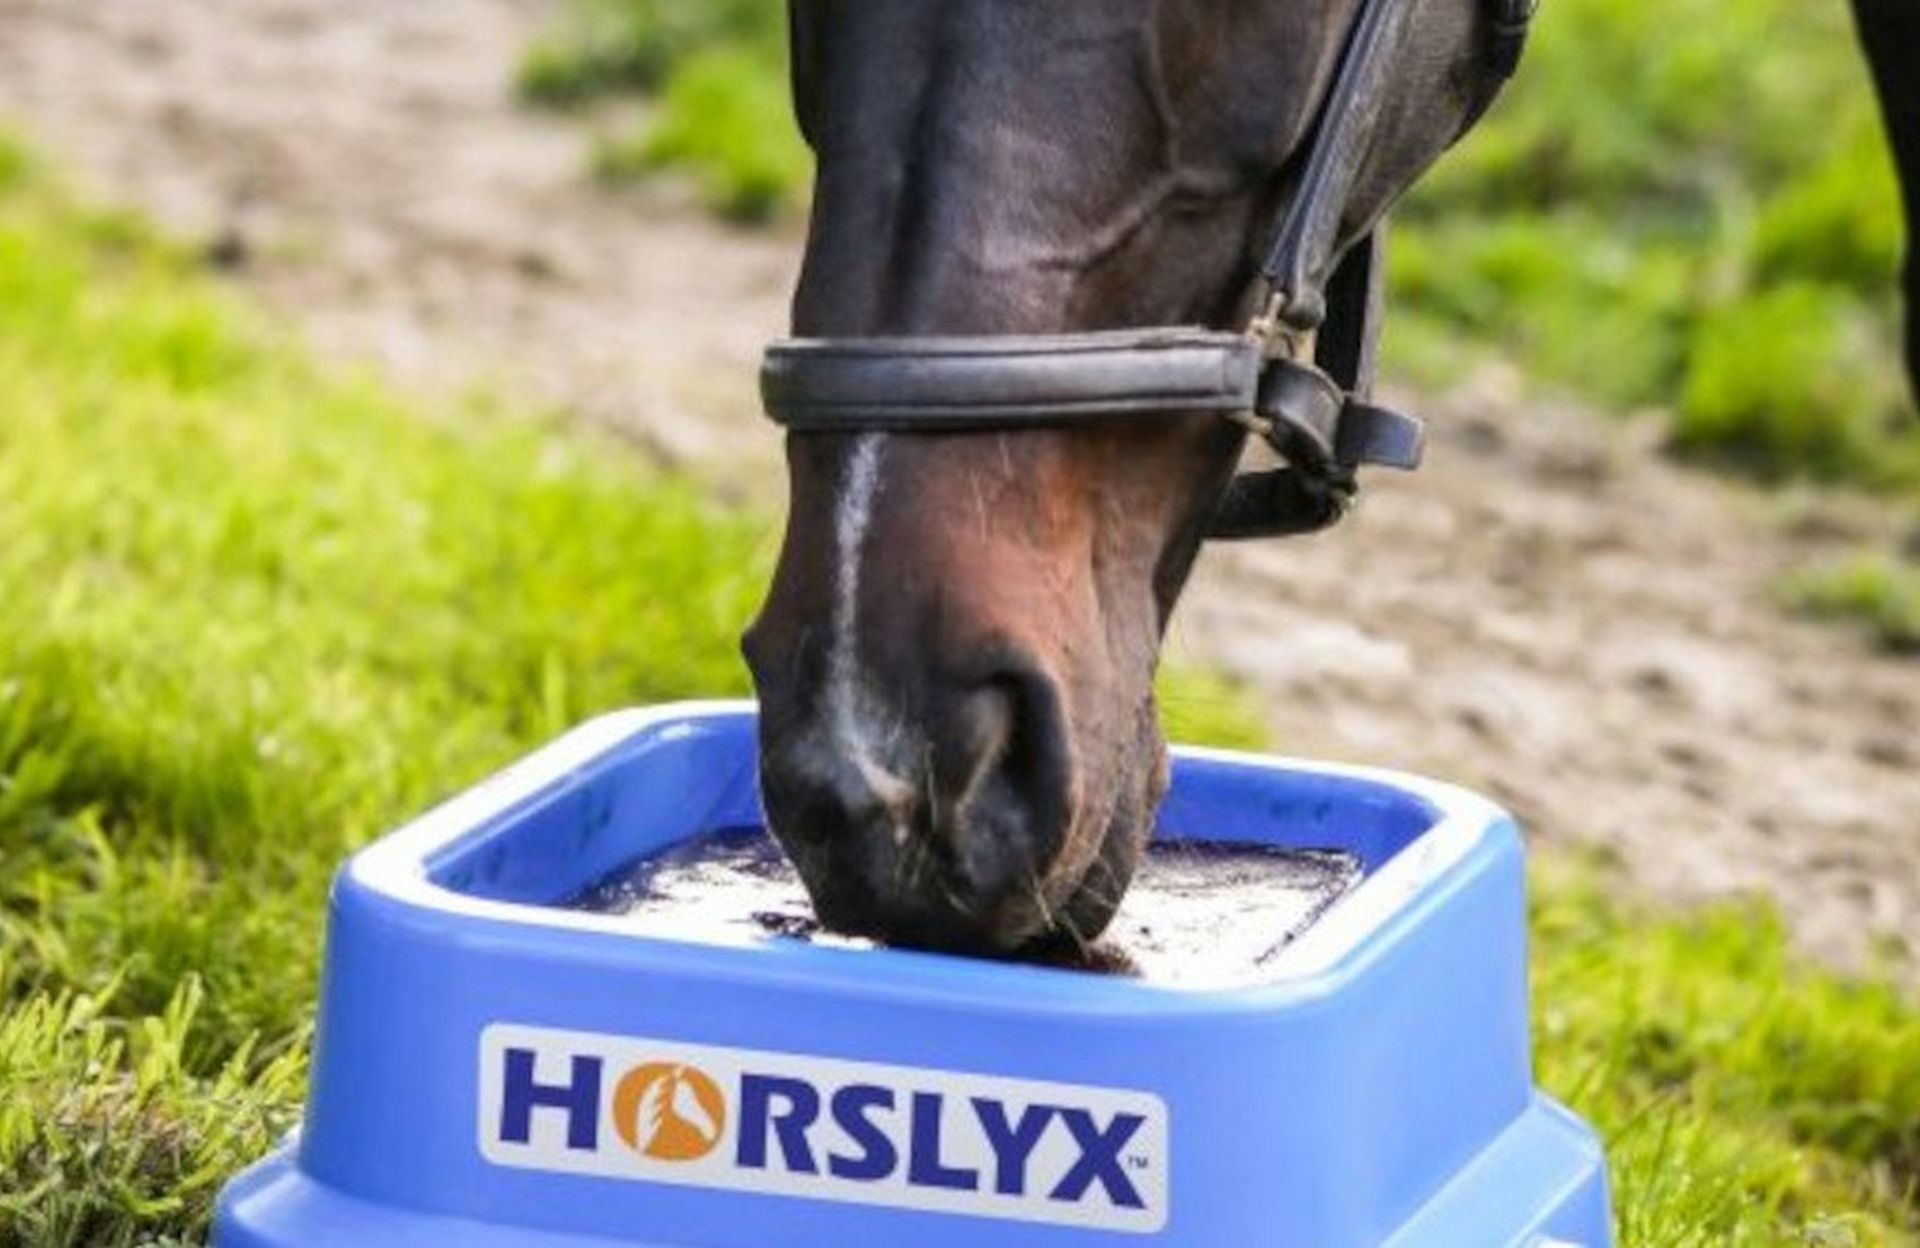 Healthy Horses Have Horslyx – Find Out Why